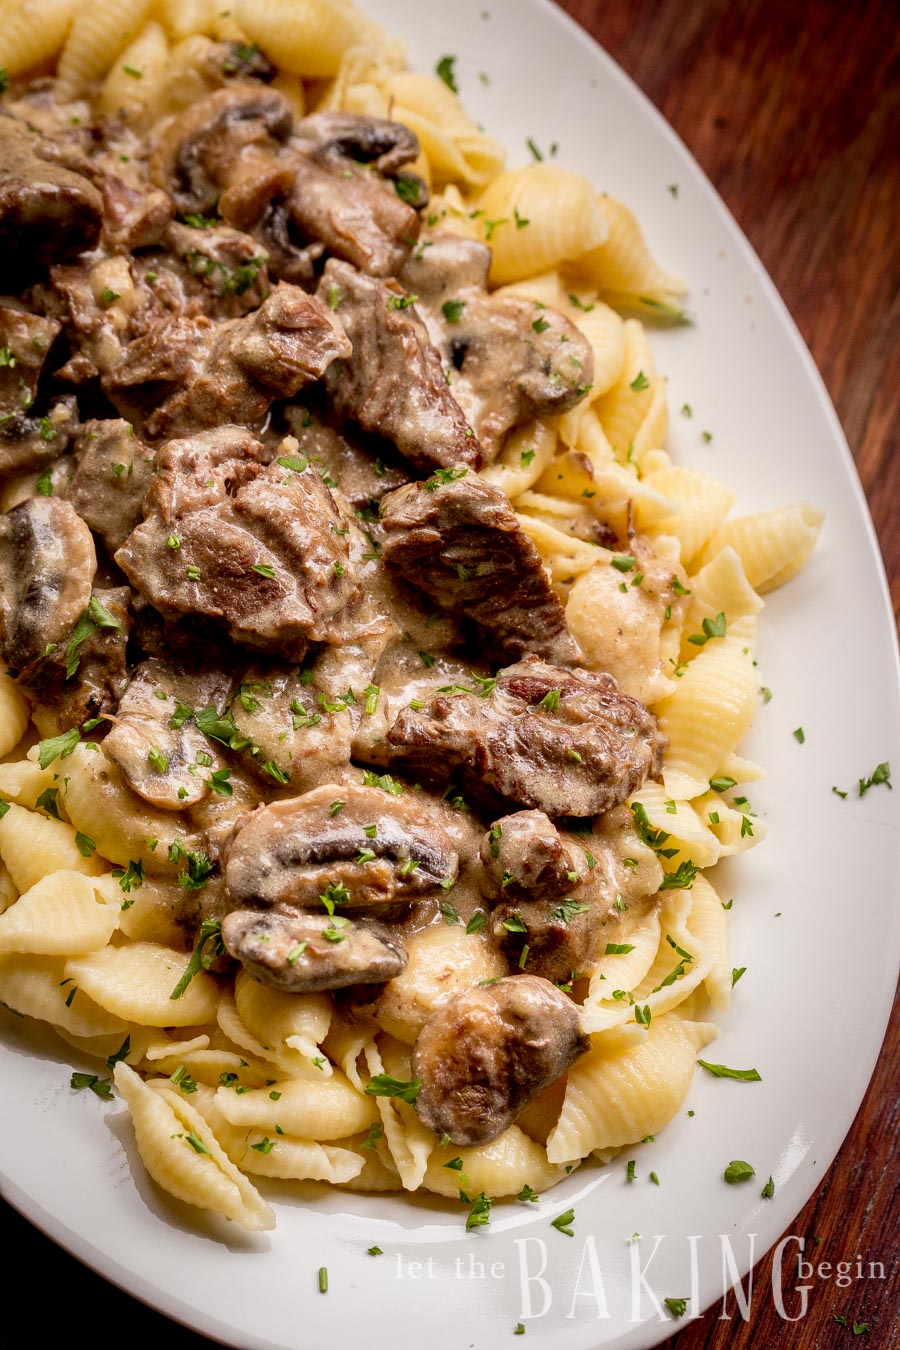 Beef stroganoff topped with fresh greens in a large decorative bowl.